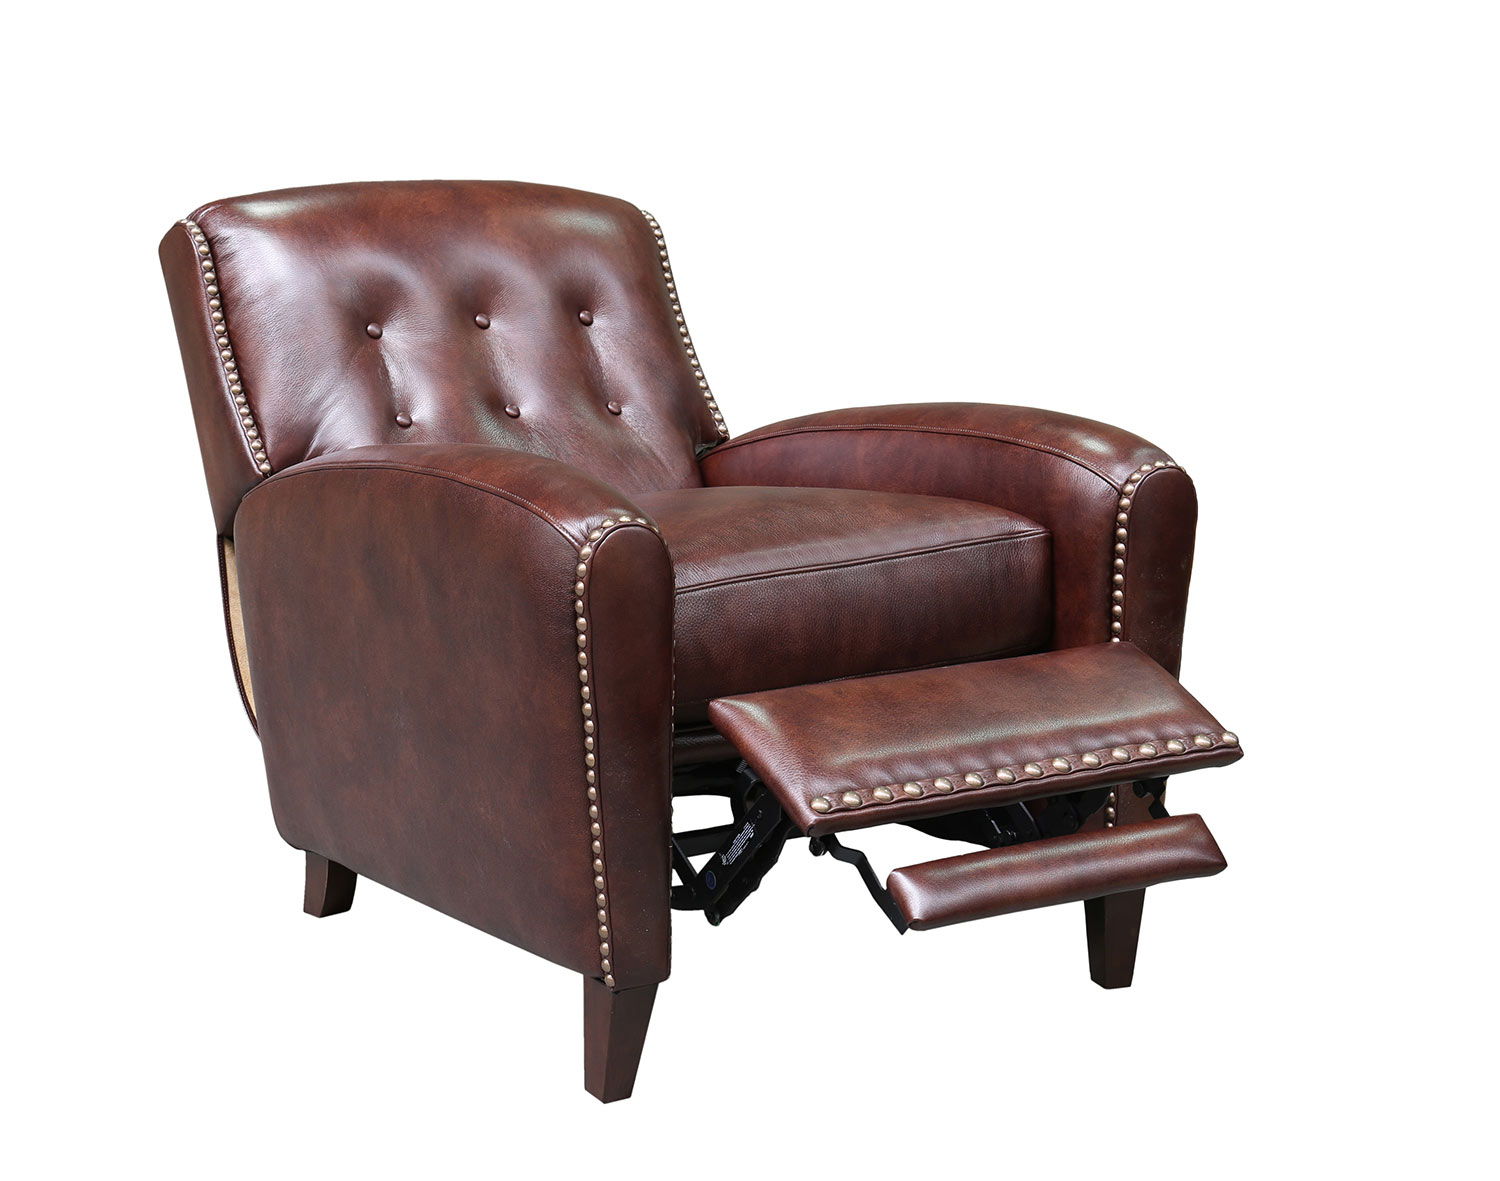 Barcalounger Willoughby Recliner Chair - Wenlock Fudge/All Leather